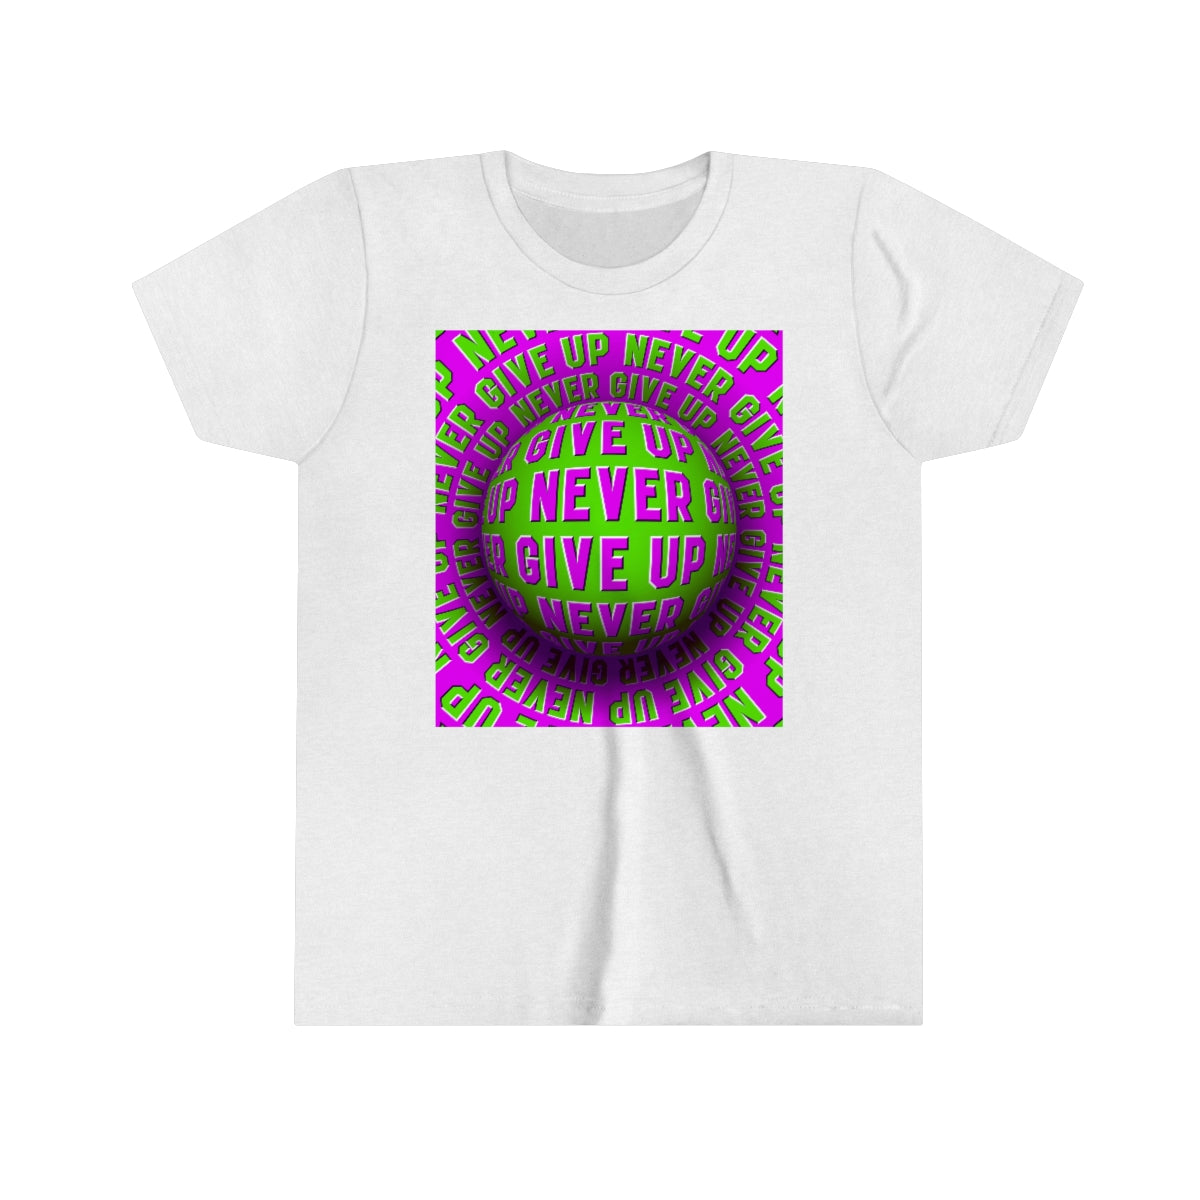 Youth Short Sleeve Tee "Optical illusion Never give up"